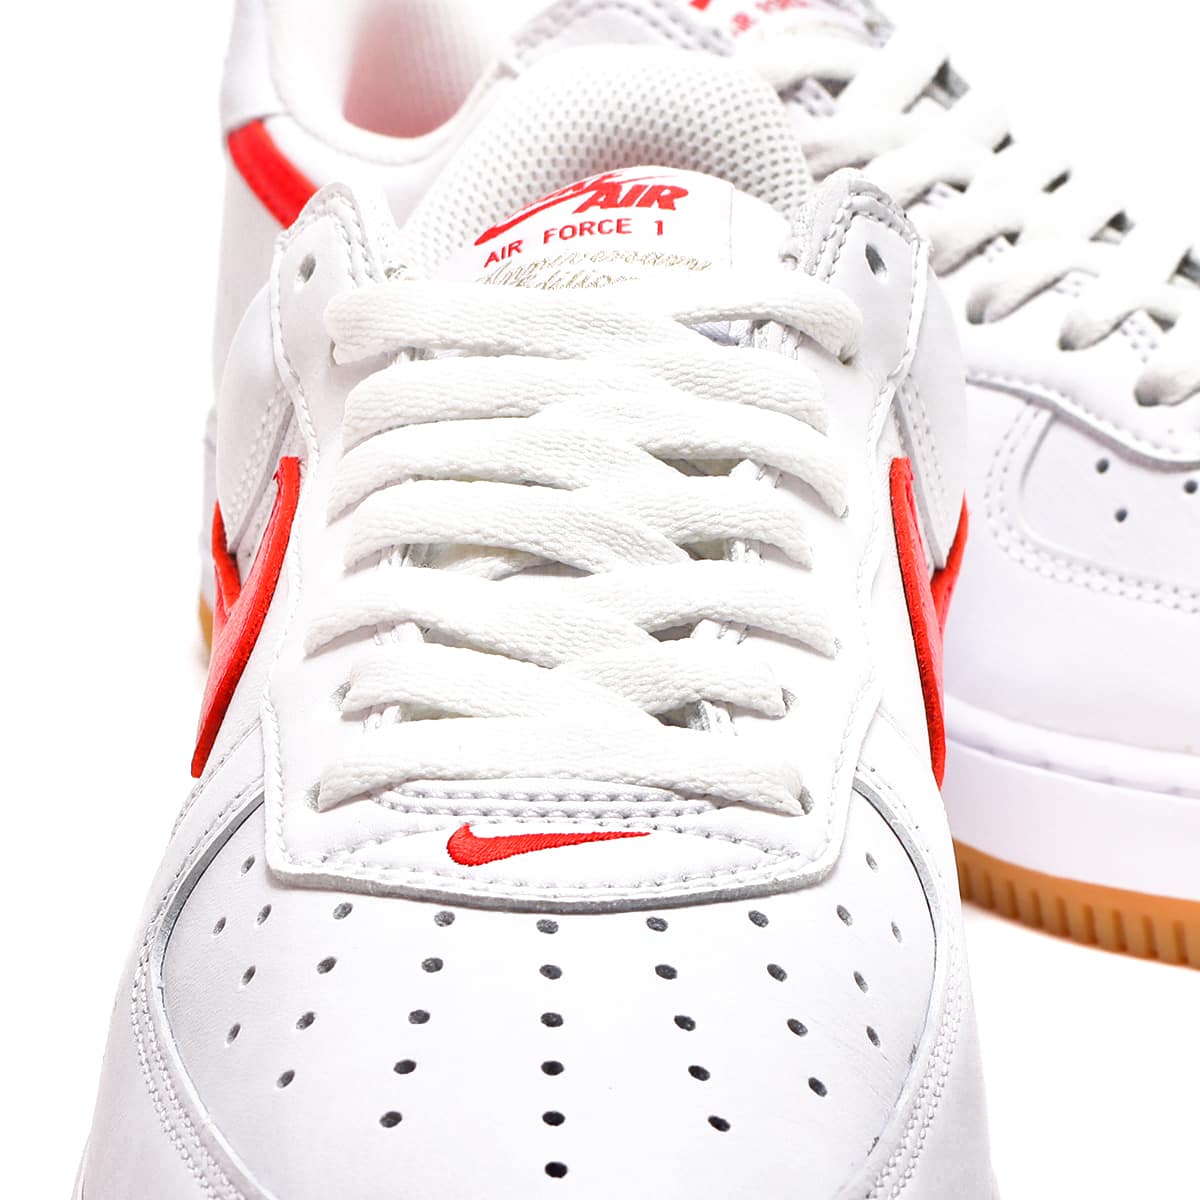 Nike Air Force 1 Low '07 White/Wolf grey